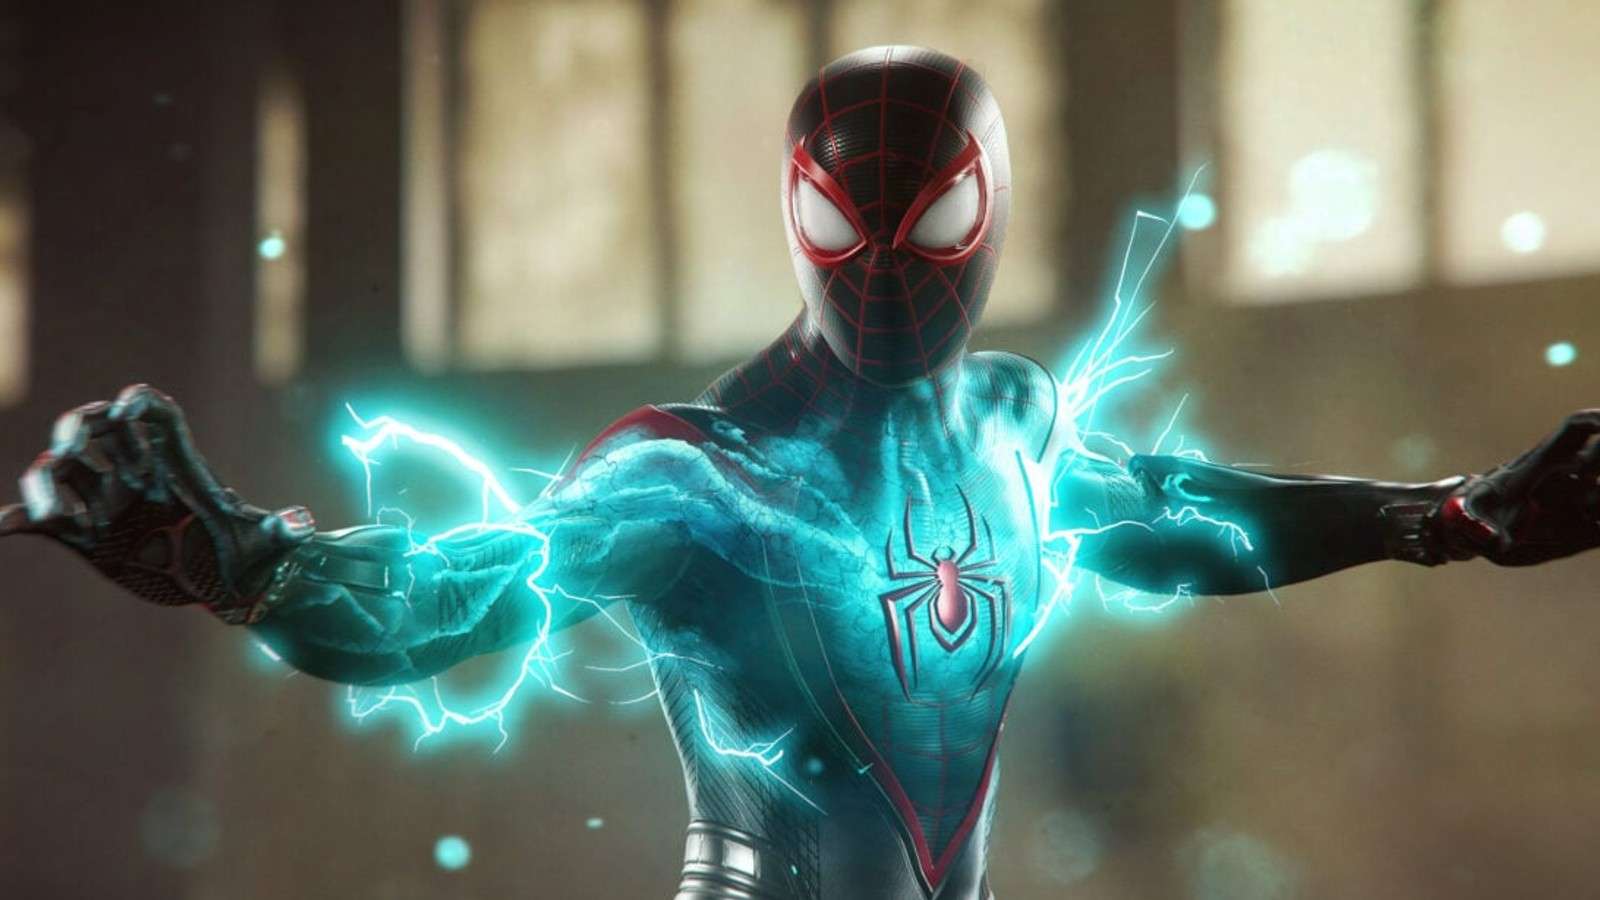 An image of Miles Morales in Marvel's Spider-Man 2.